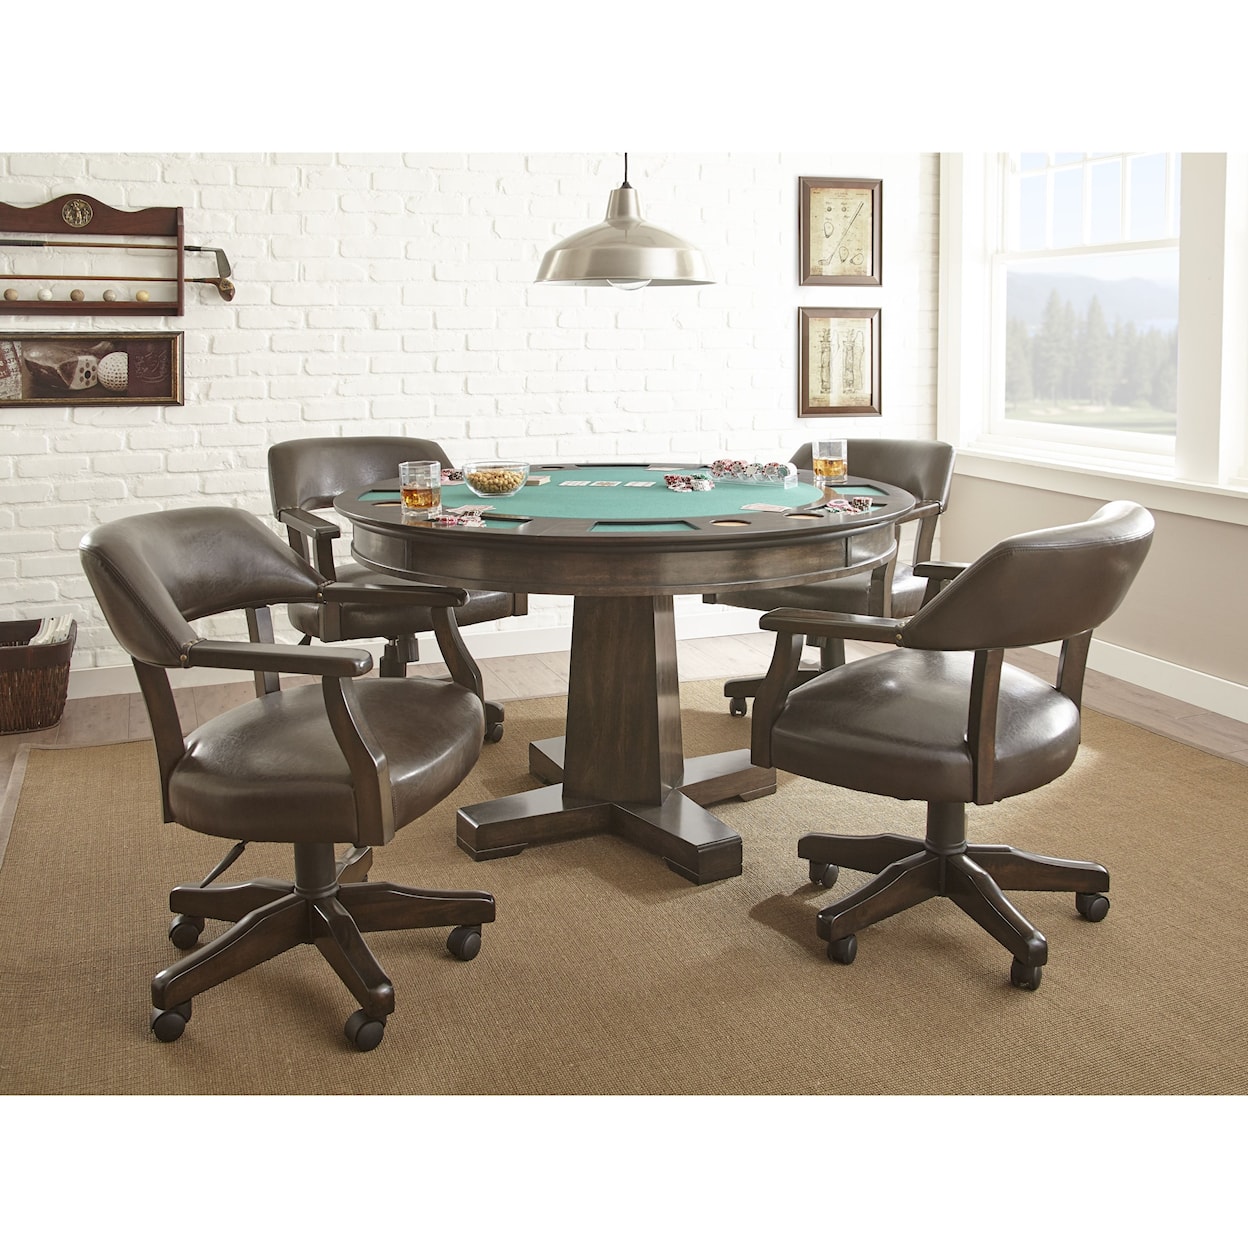 Steve Silver Ruby Reversible Game Table